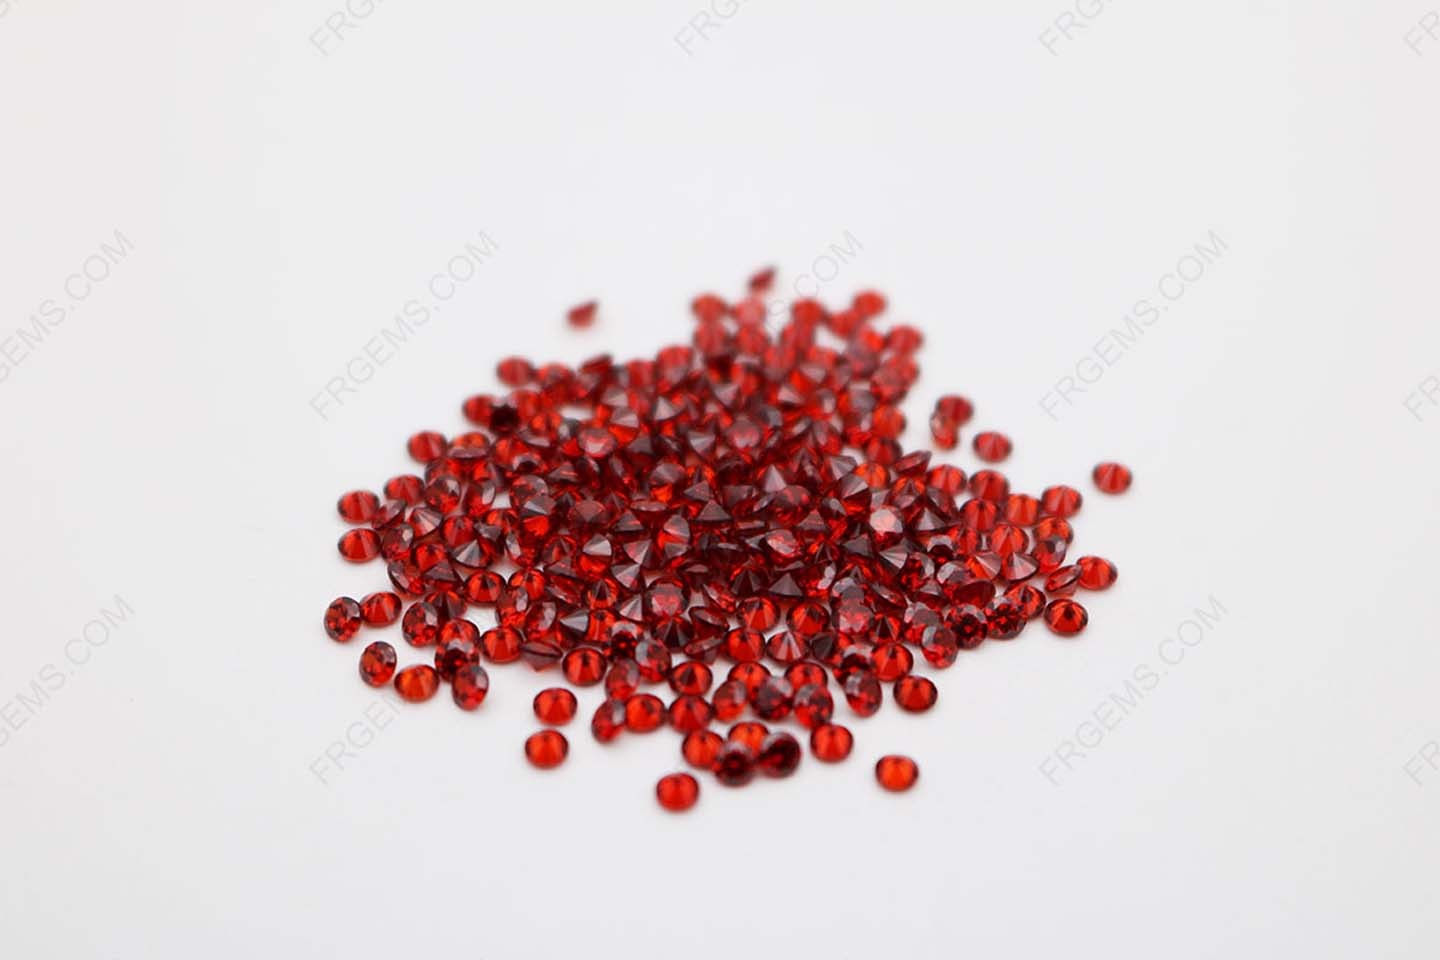 Cubic Zirconia Garnet Red Round Faceted Cut 2mm stones CZ22 IMG_0999